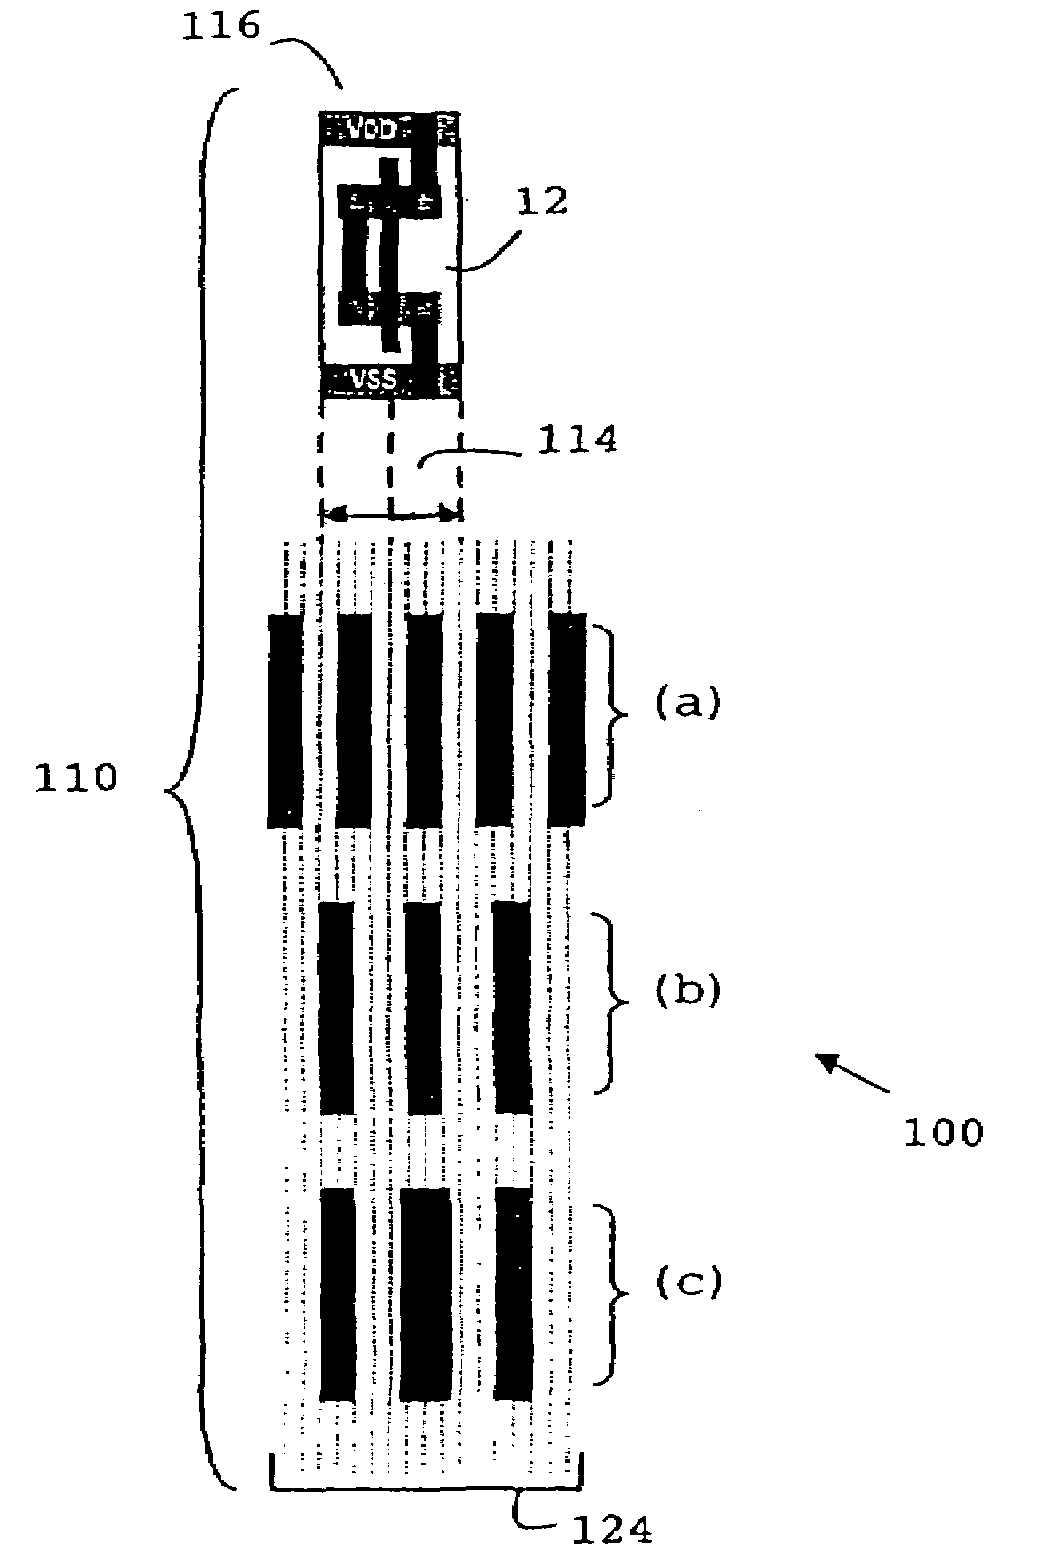 Aligned logic cell grid and interconnect routing architecture